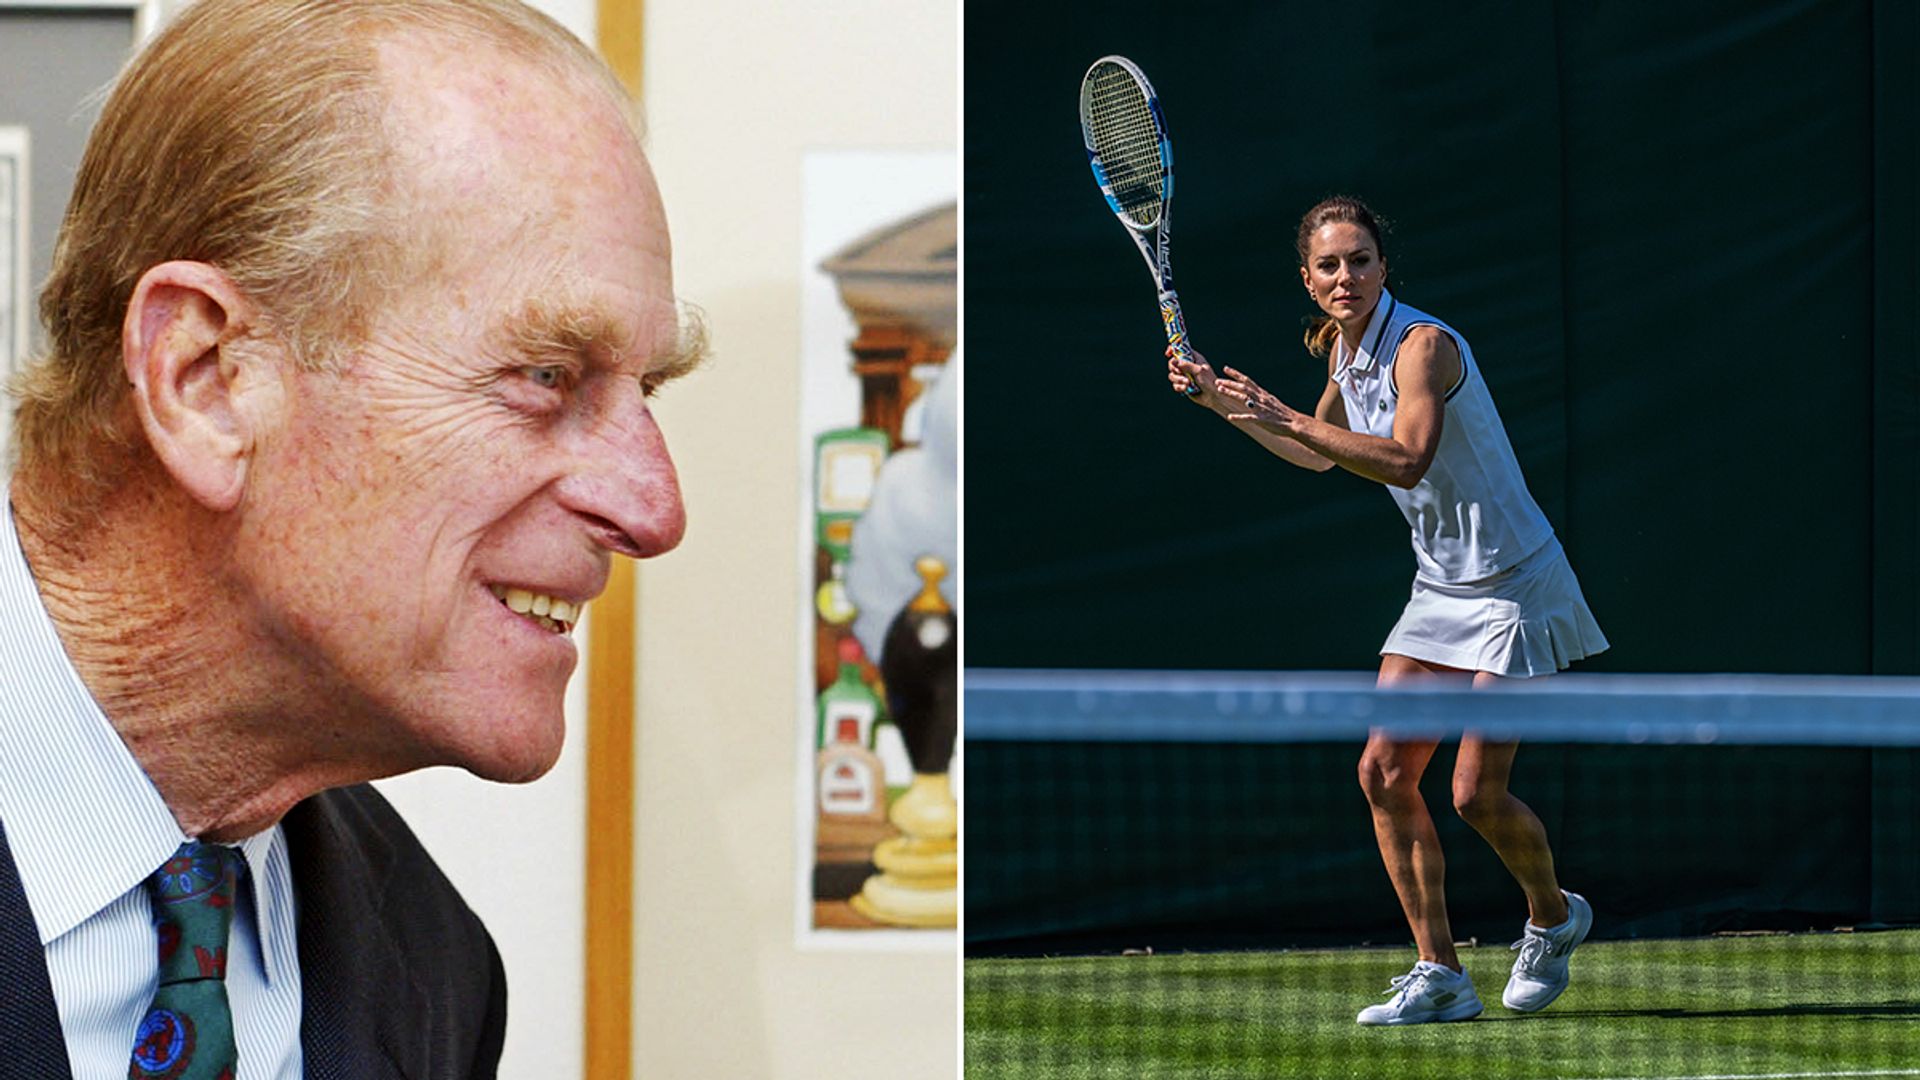 Split image of Prince Philip and Kate Middleton playing tennis